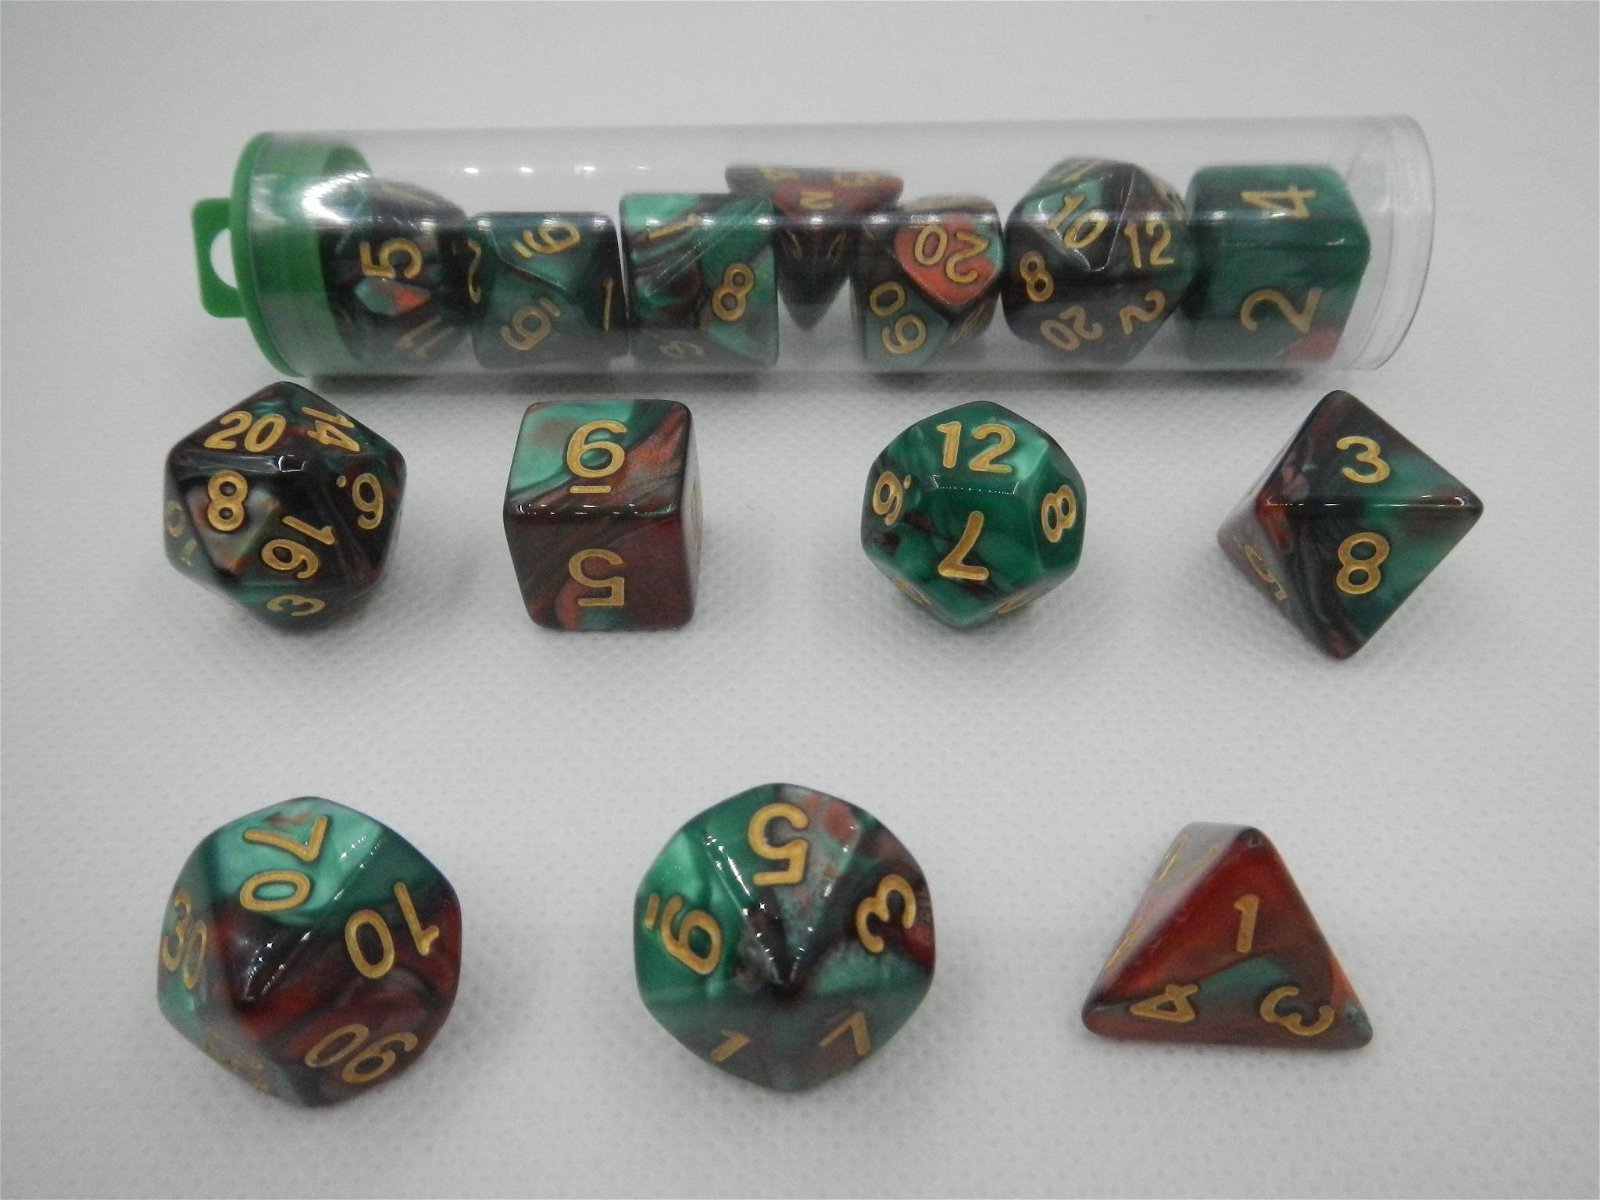 Paladin Roleplaying Red and Brown Dice - Expanded DND Set with Extra D20